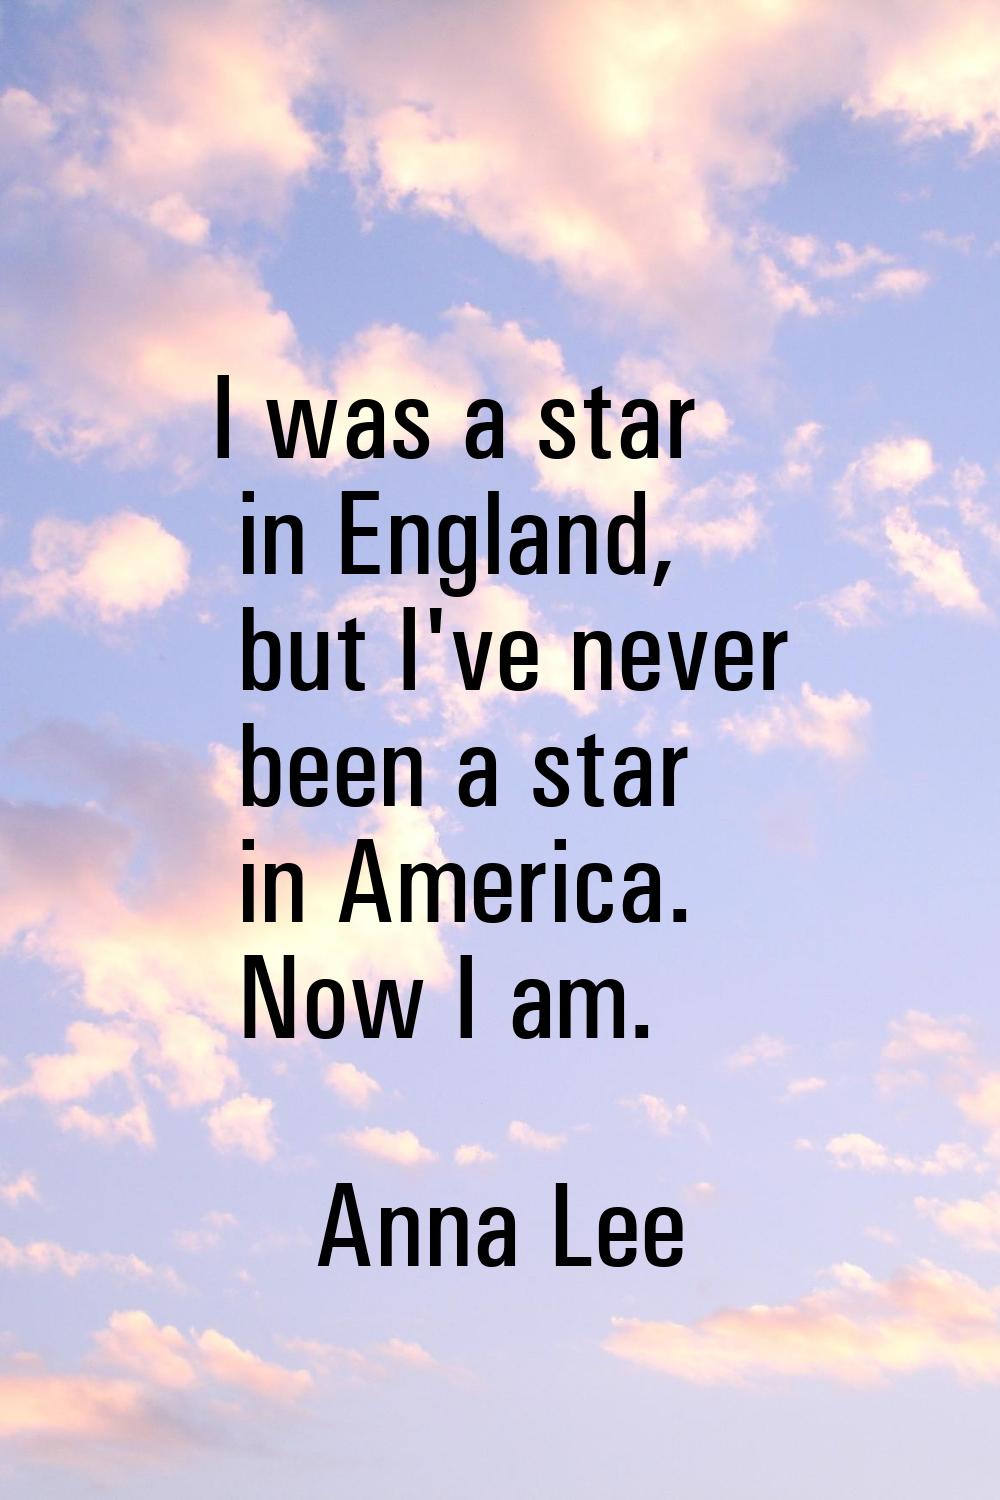 I was a star in England, but I've never been a star in America. Now I am.